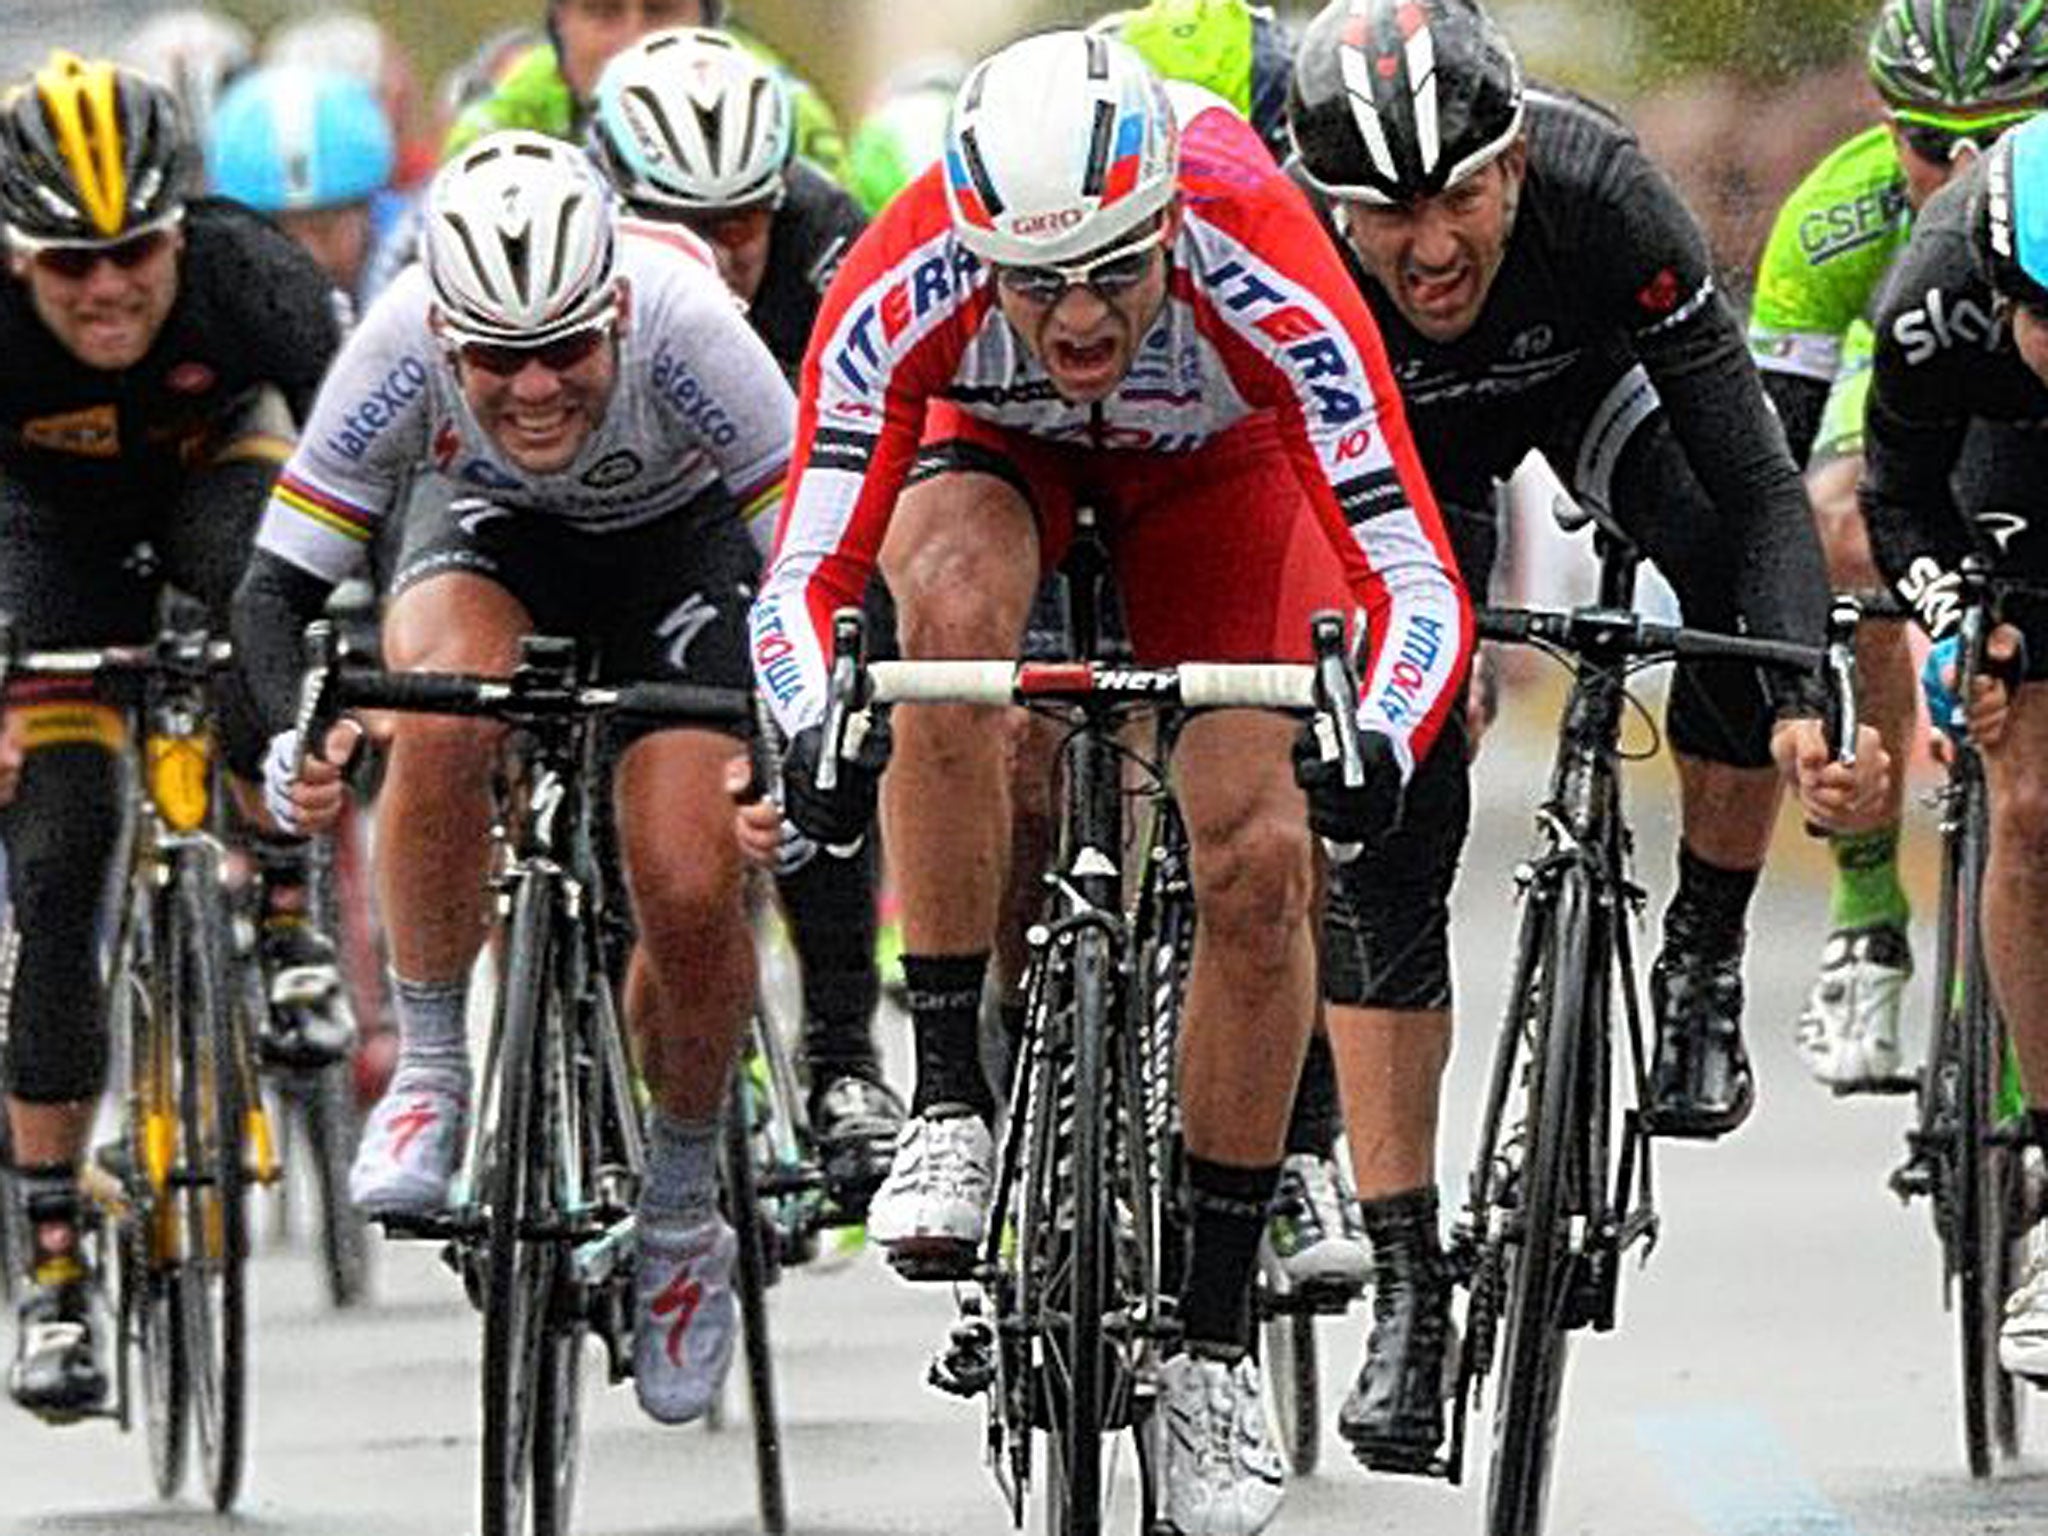 Alexander Kristoff on his way to victory in the year’s first one-day classic race